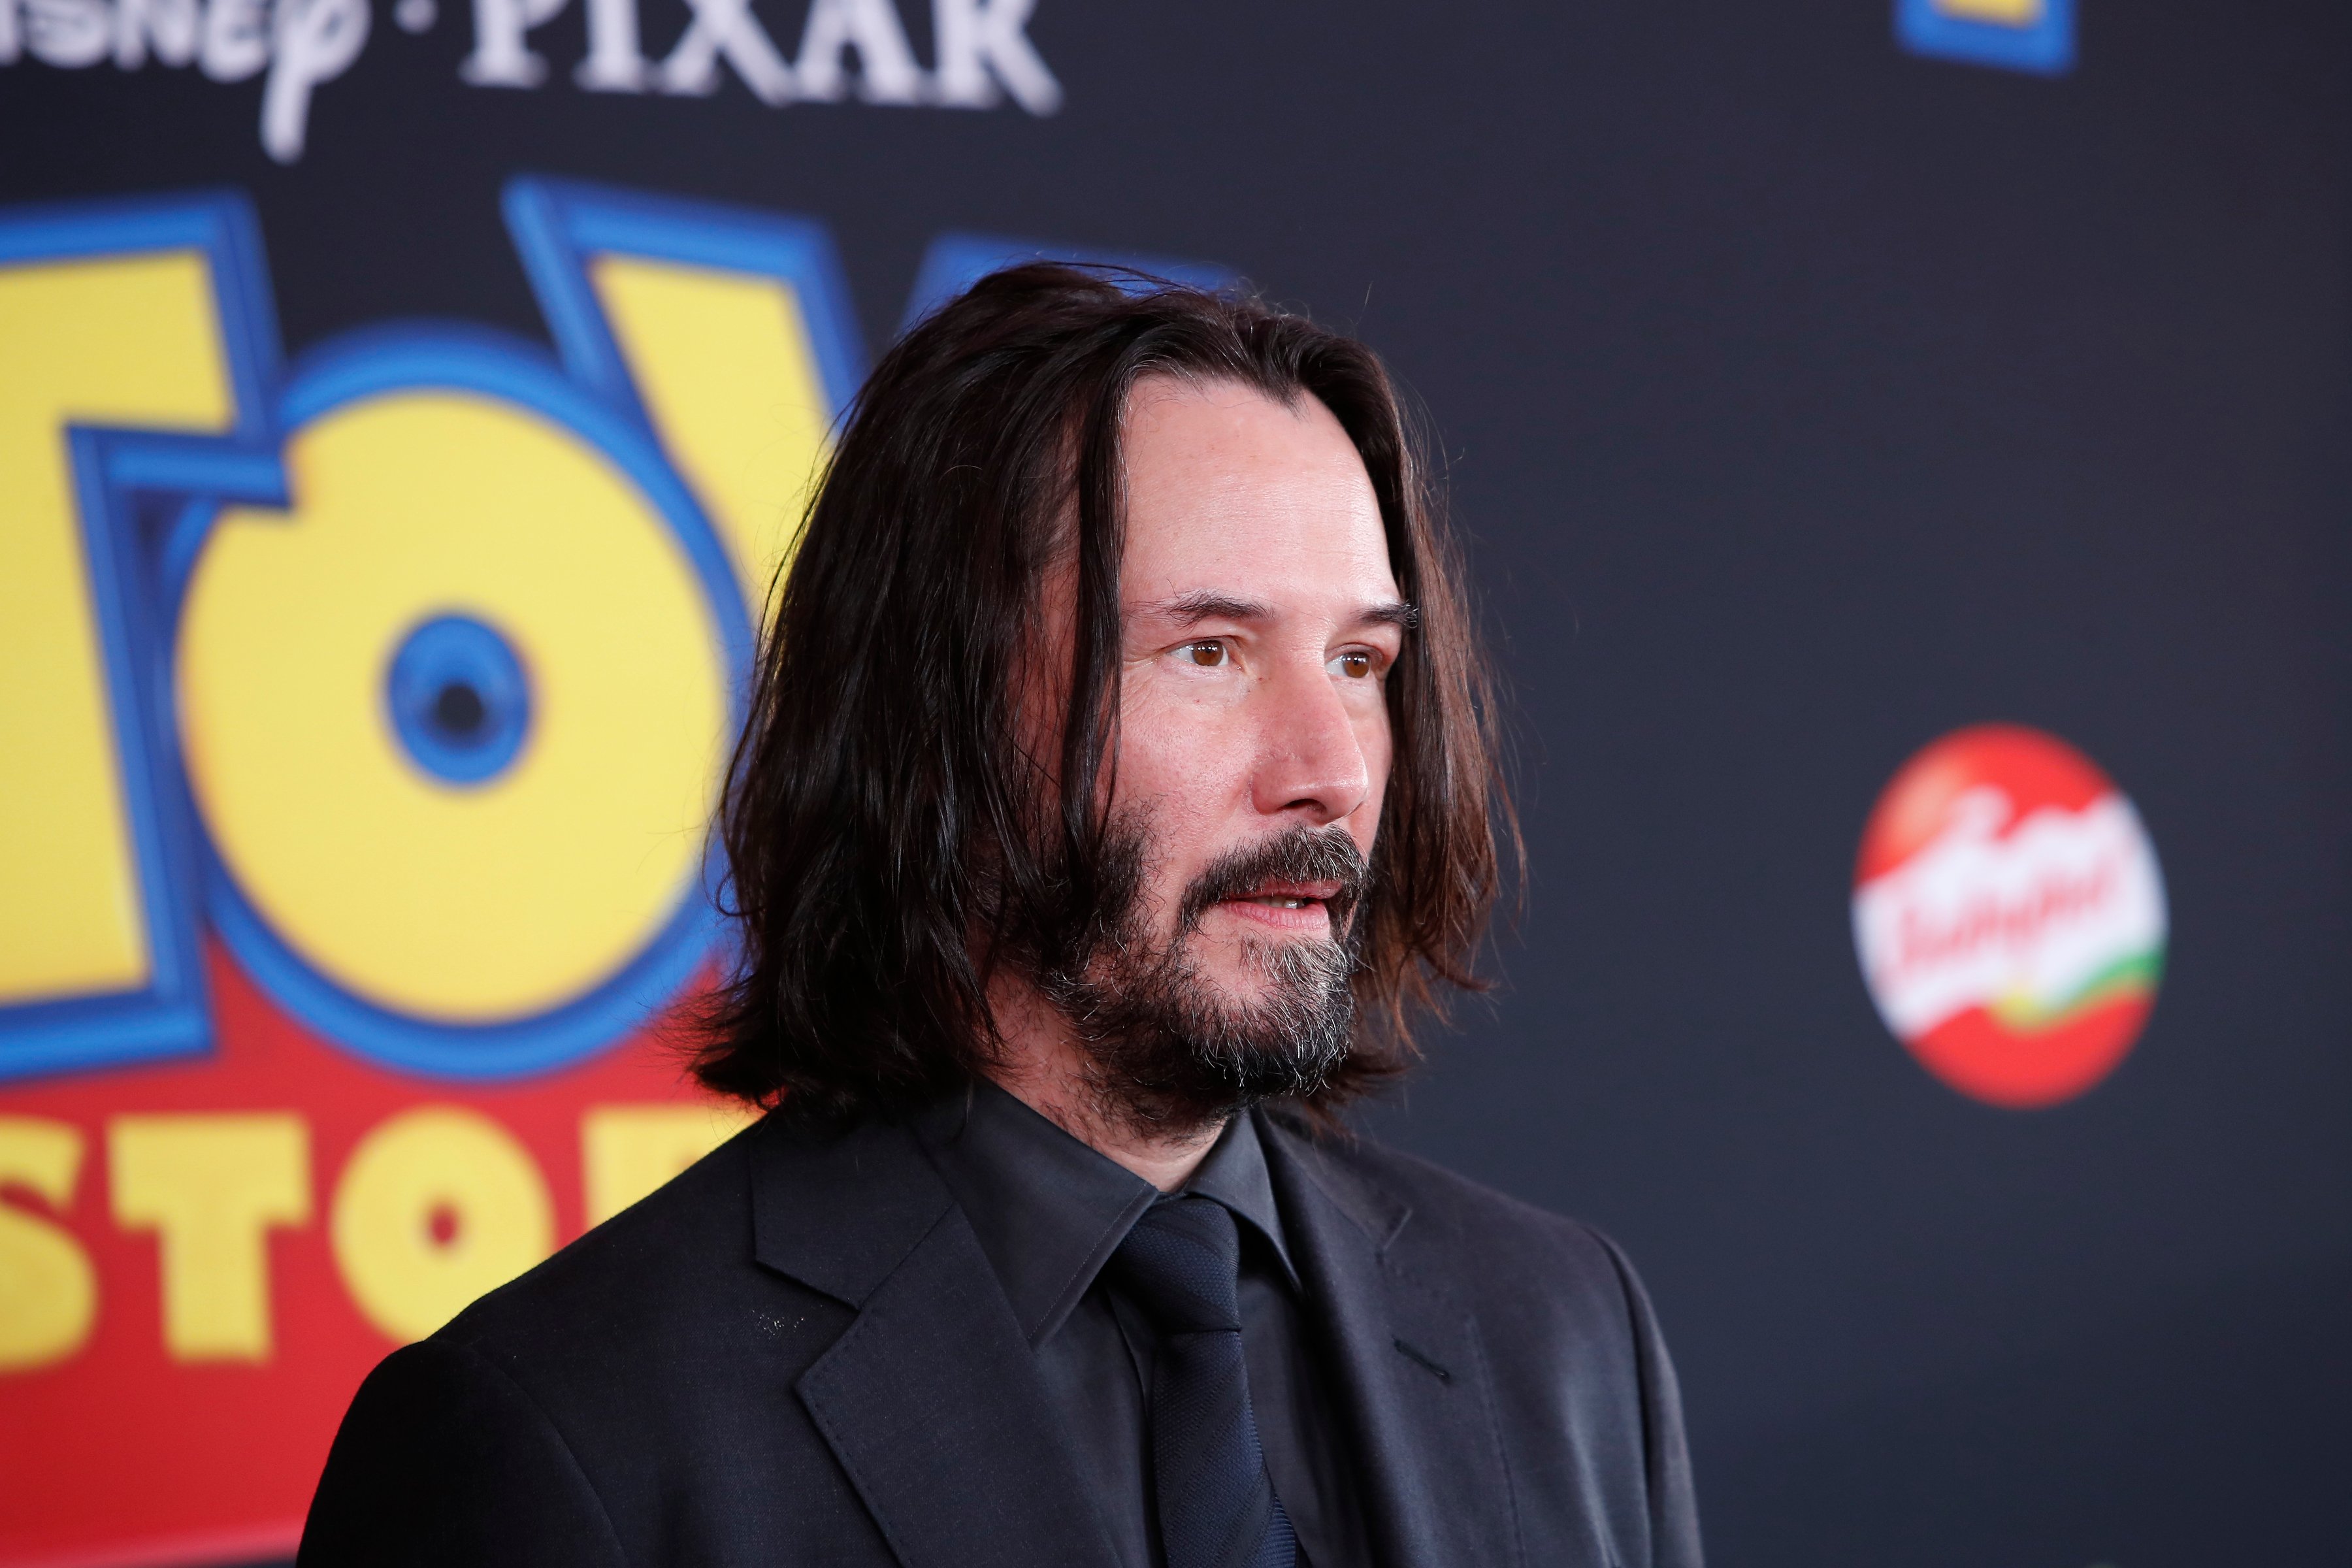 Keanu Reeves attends the premiere of "Toy Story 4" at Hollywood's El Capitan Theatre in June 2019 | Photo: Getty Images